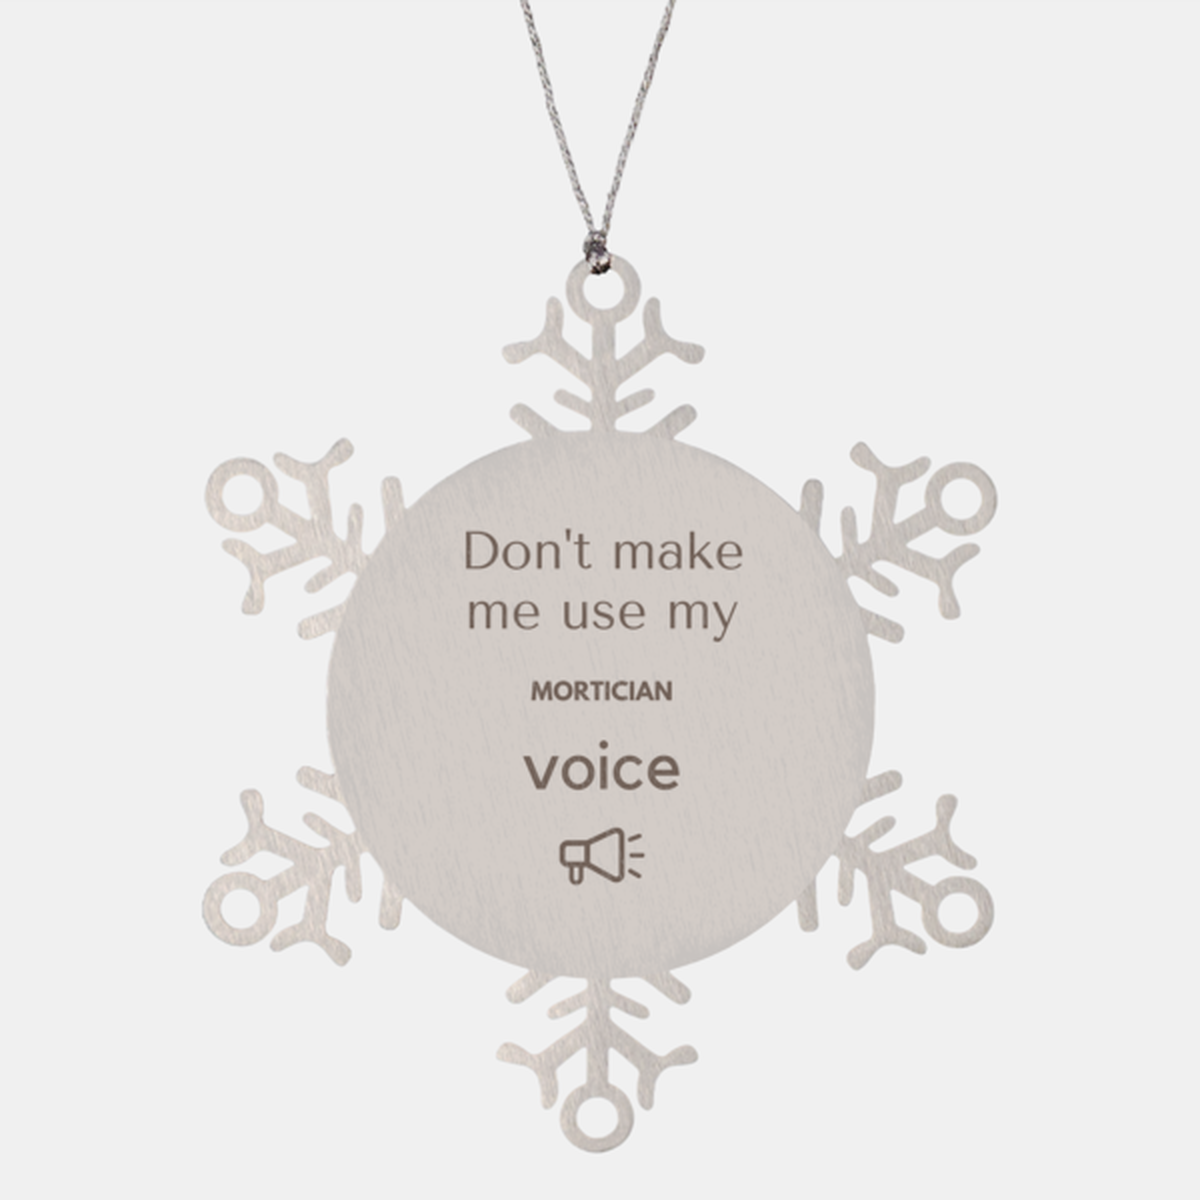 Don't make me use my Mortician voice, Sarcasm Mortician Ornament Gifts, Christmas Mortician Snowflake Ornament Unique Gifts For Mortician Coworkers, Men, Women, Colleague, Friends